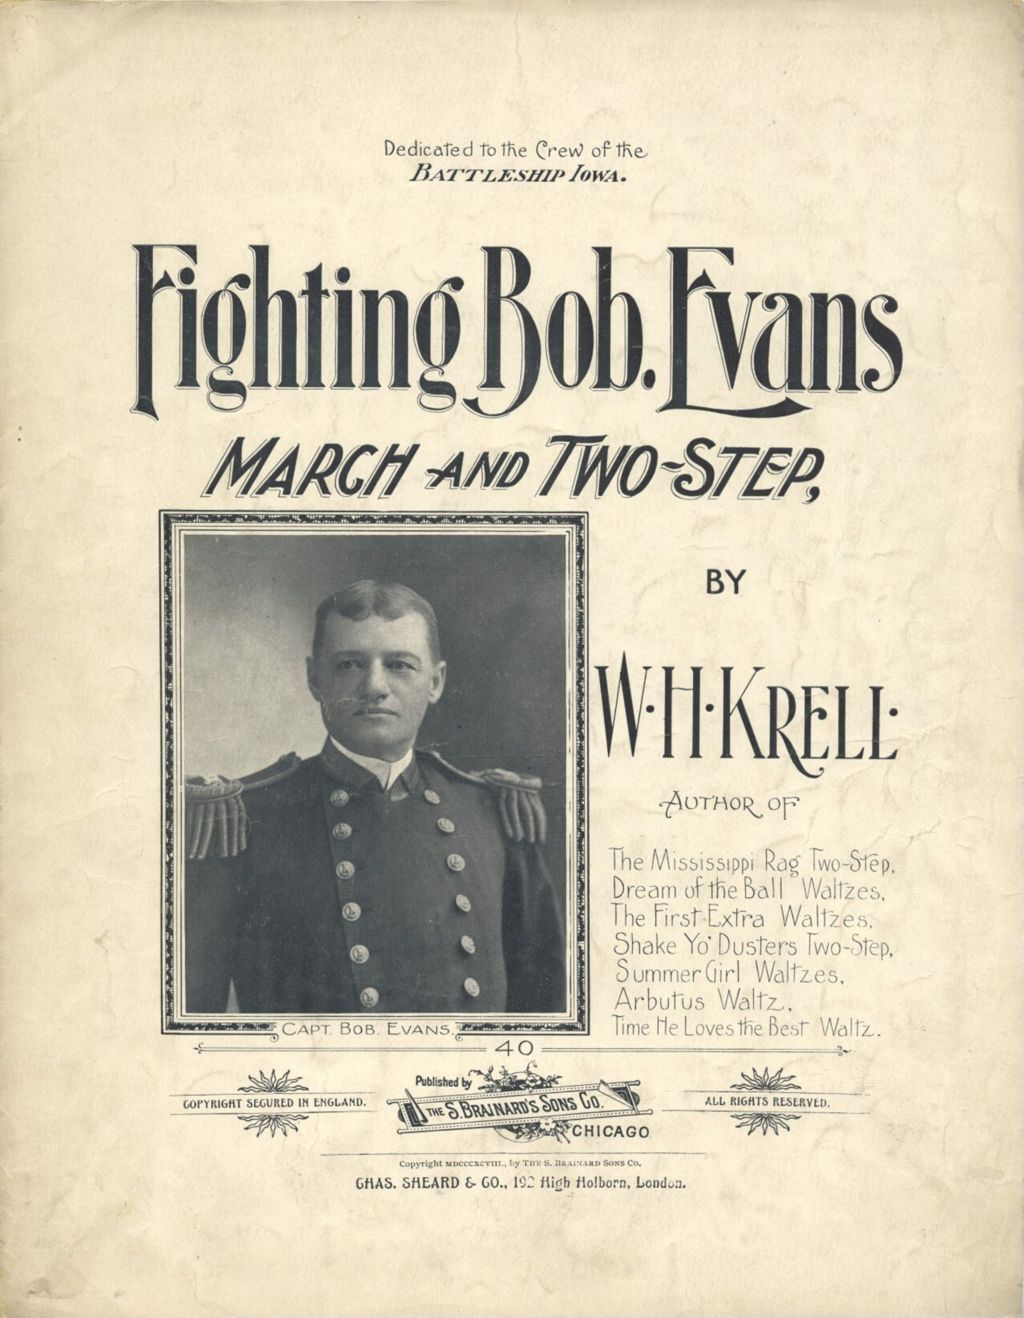 Miniature of Fighting Bob Evans (March and Two-Step)